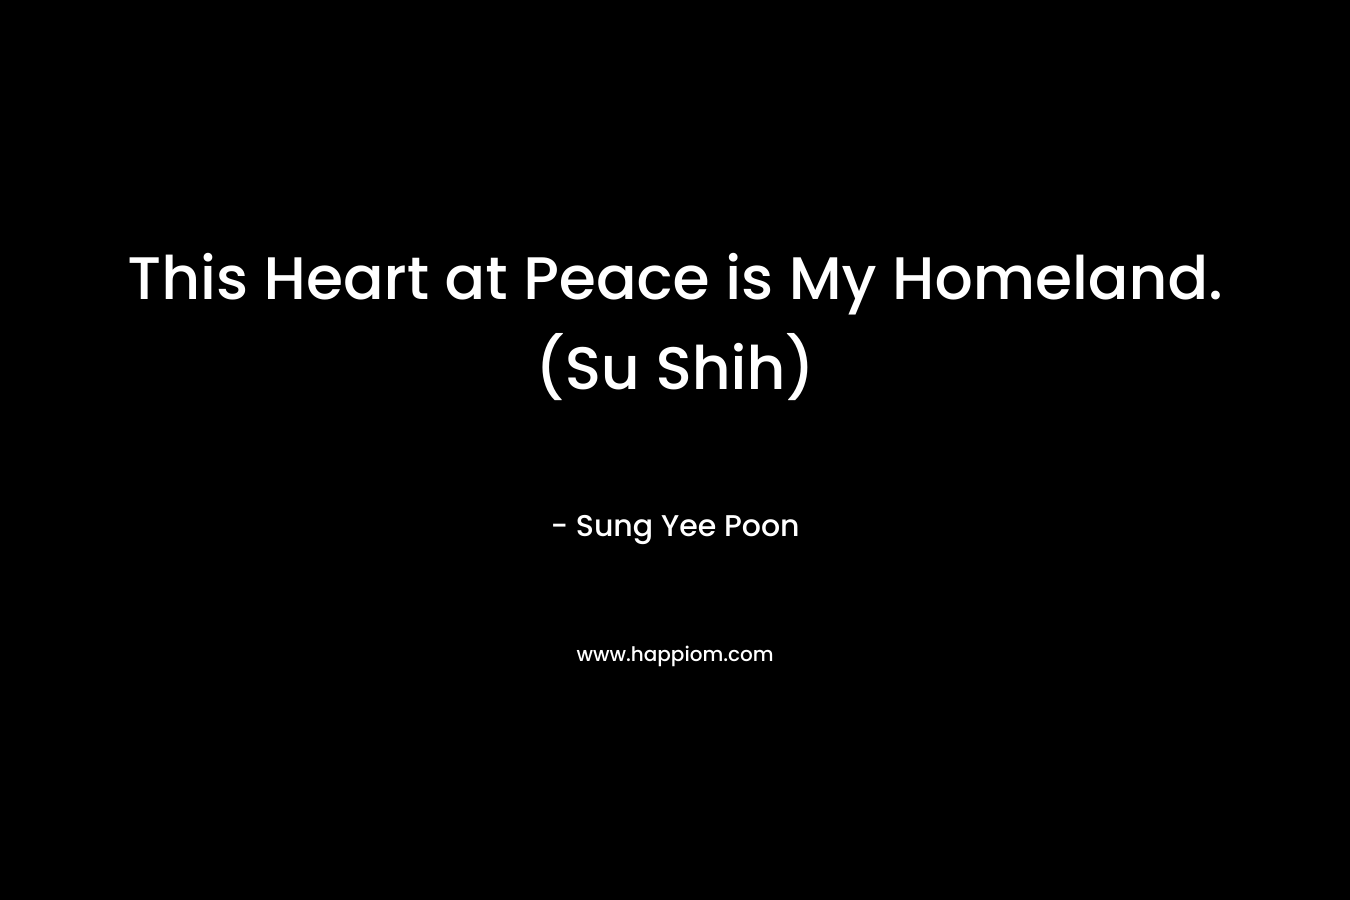 This Heart at Peace is My Homeland. (Su Shih) – Sung Yee Poon